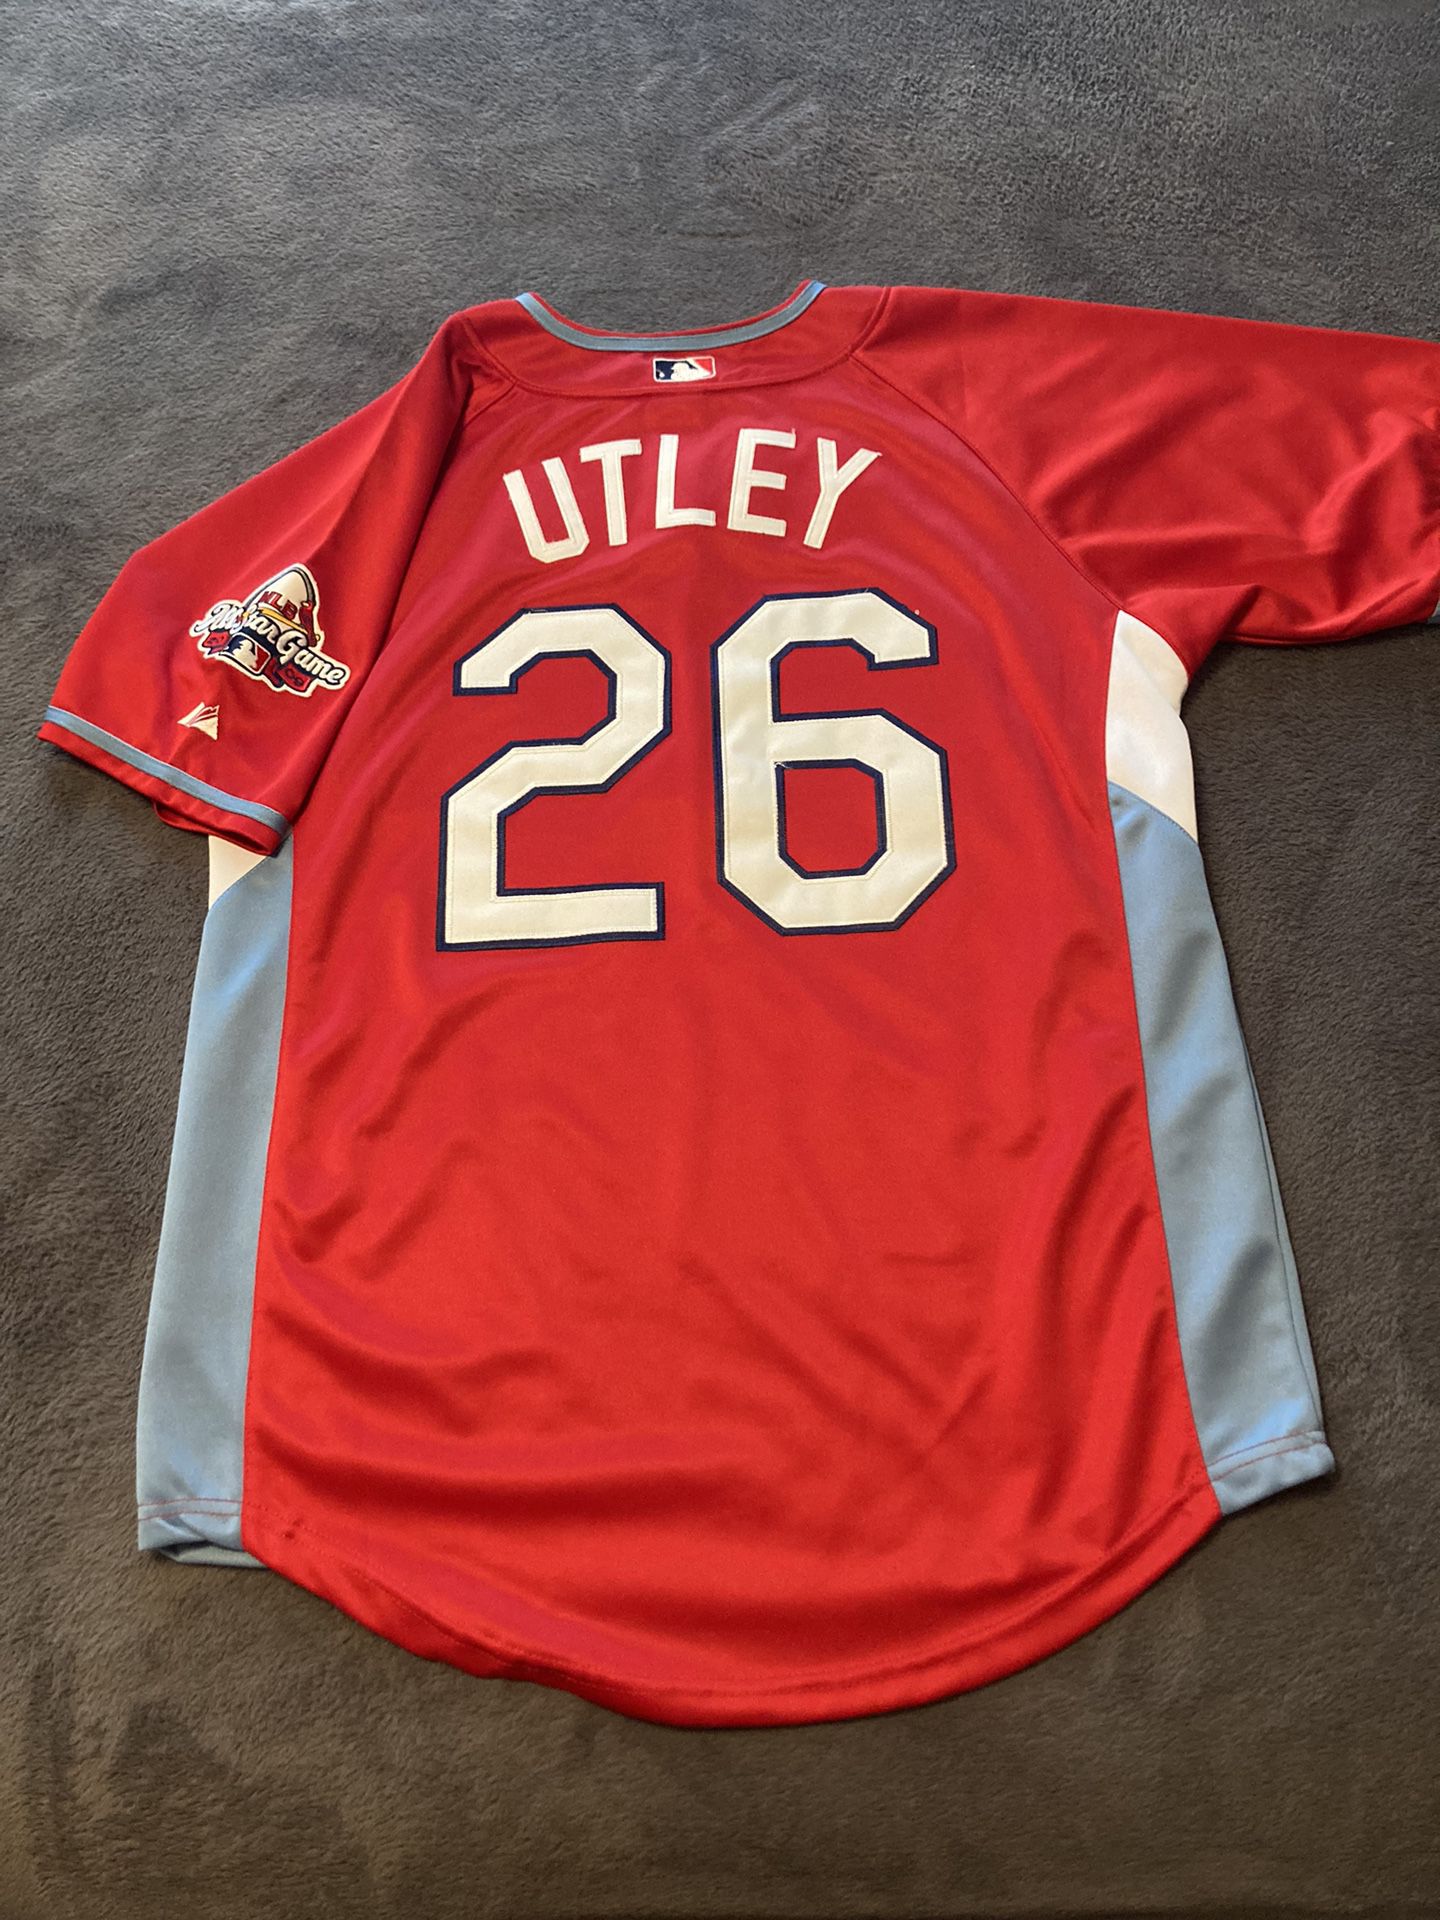 Chase Utley Majestic MLB All-Star Jersey Size 48 - 2009 National League for  Sale in Pottstown, PA - OfferUp